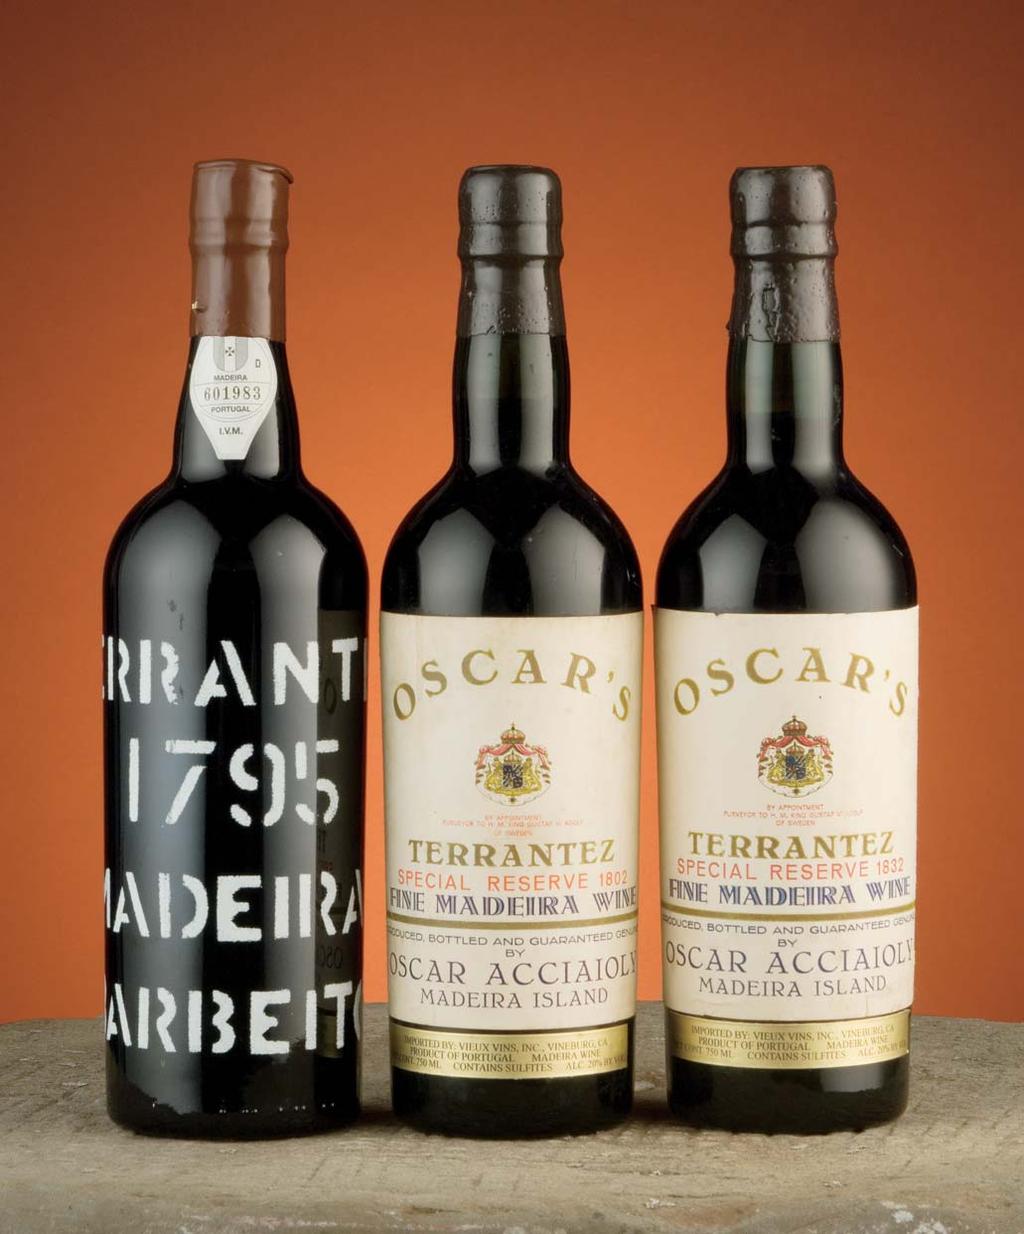 MADEIRA Madeira, a 285-square-mile island off the coast of North Africa, produces some of the world s most complex, uniquely flavorful, and long-lived fortified wines.